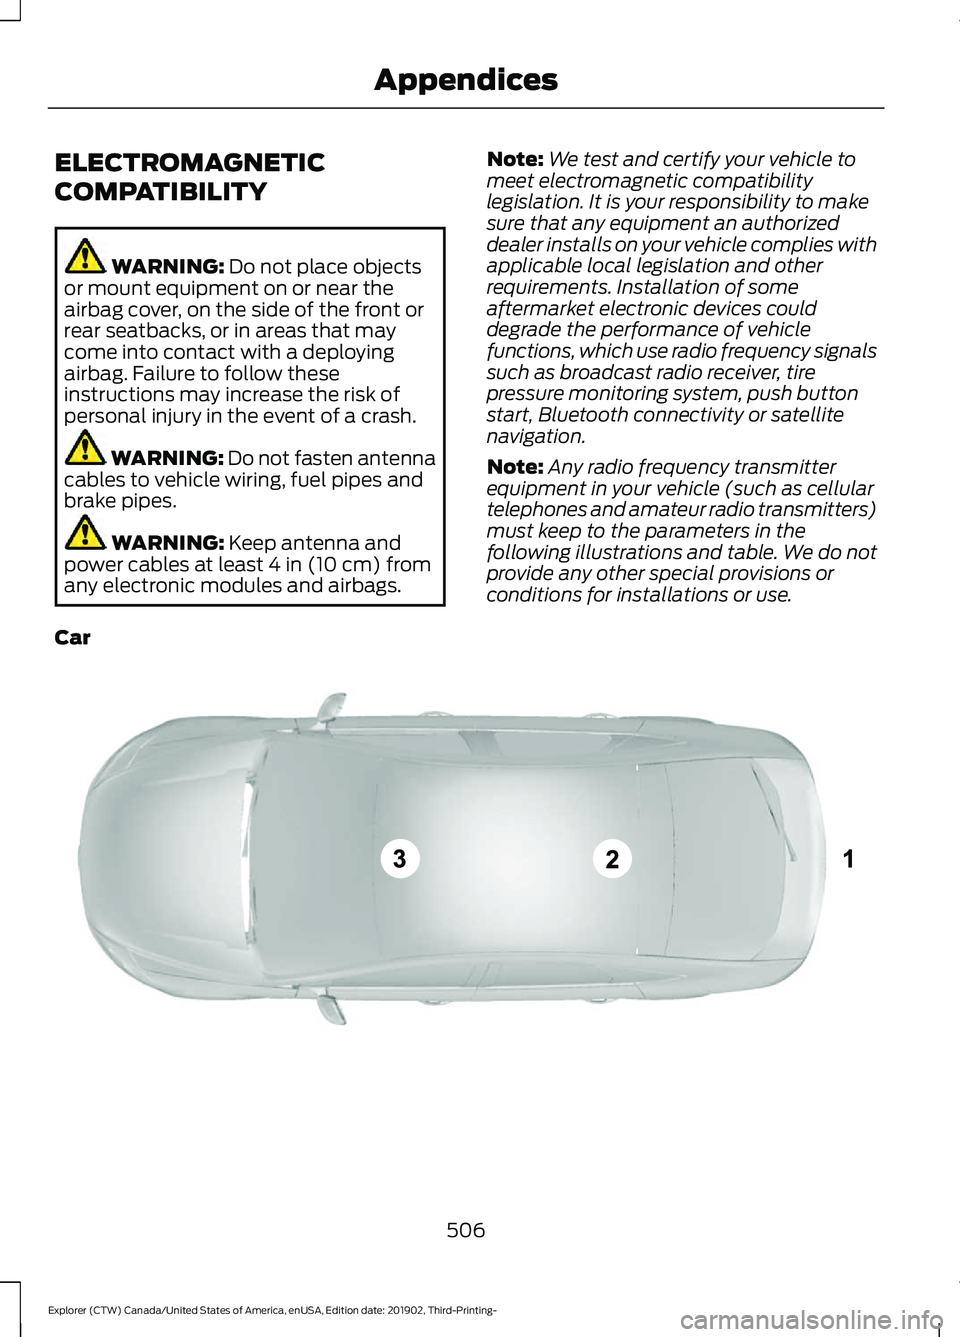 FORD EXPLORER 2020 Owners Guide ELECTROMAGNETIC
COMPATIBILITY
WARNING: Do not place objects
or mount equipment on or near the
airbag cover, on the side of the front or
rear seatbacks, or in areas that may
come into contact with a de